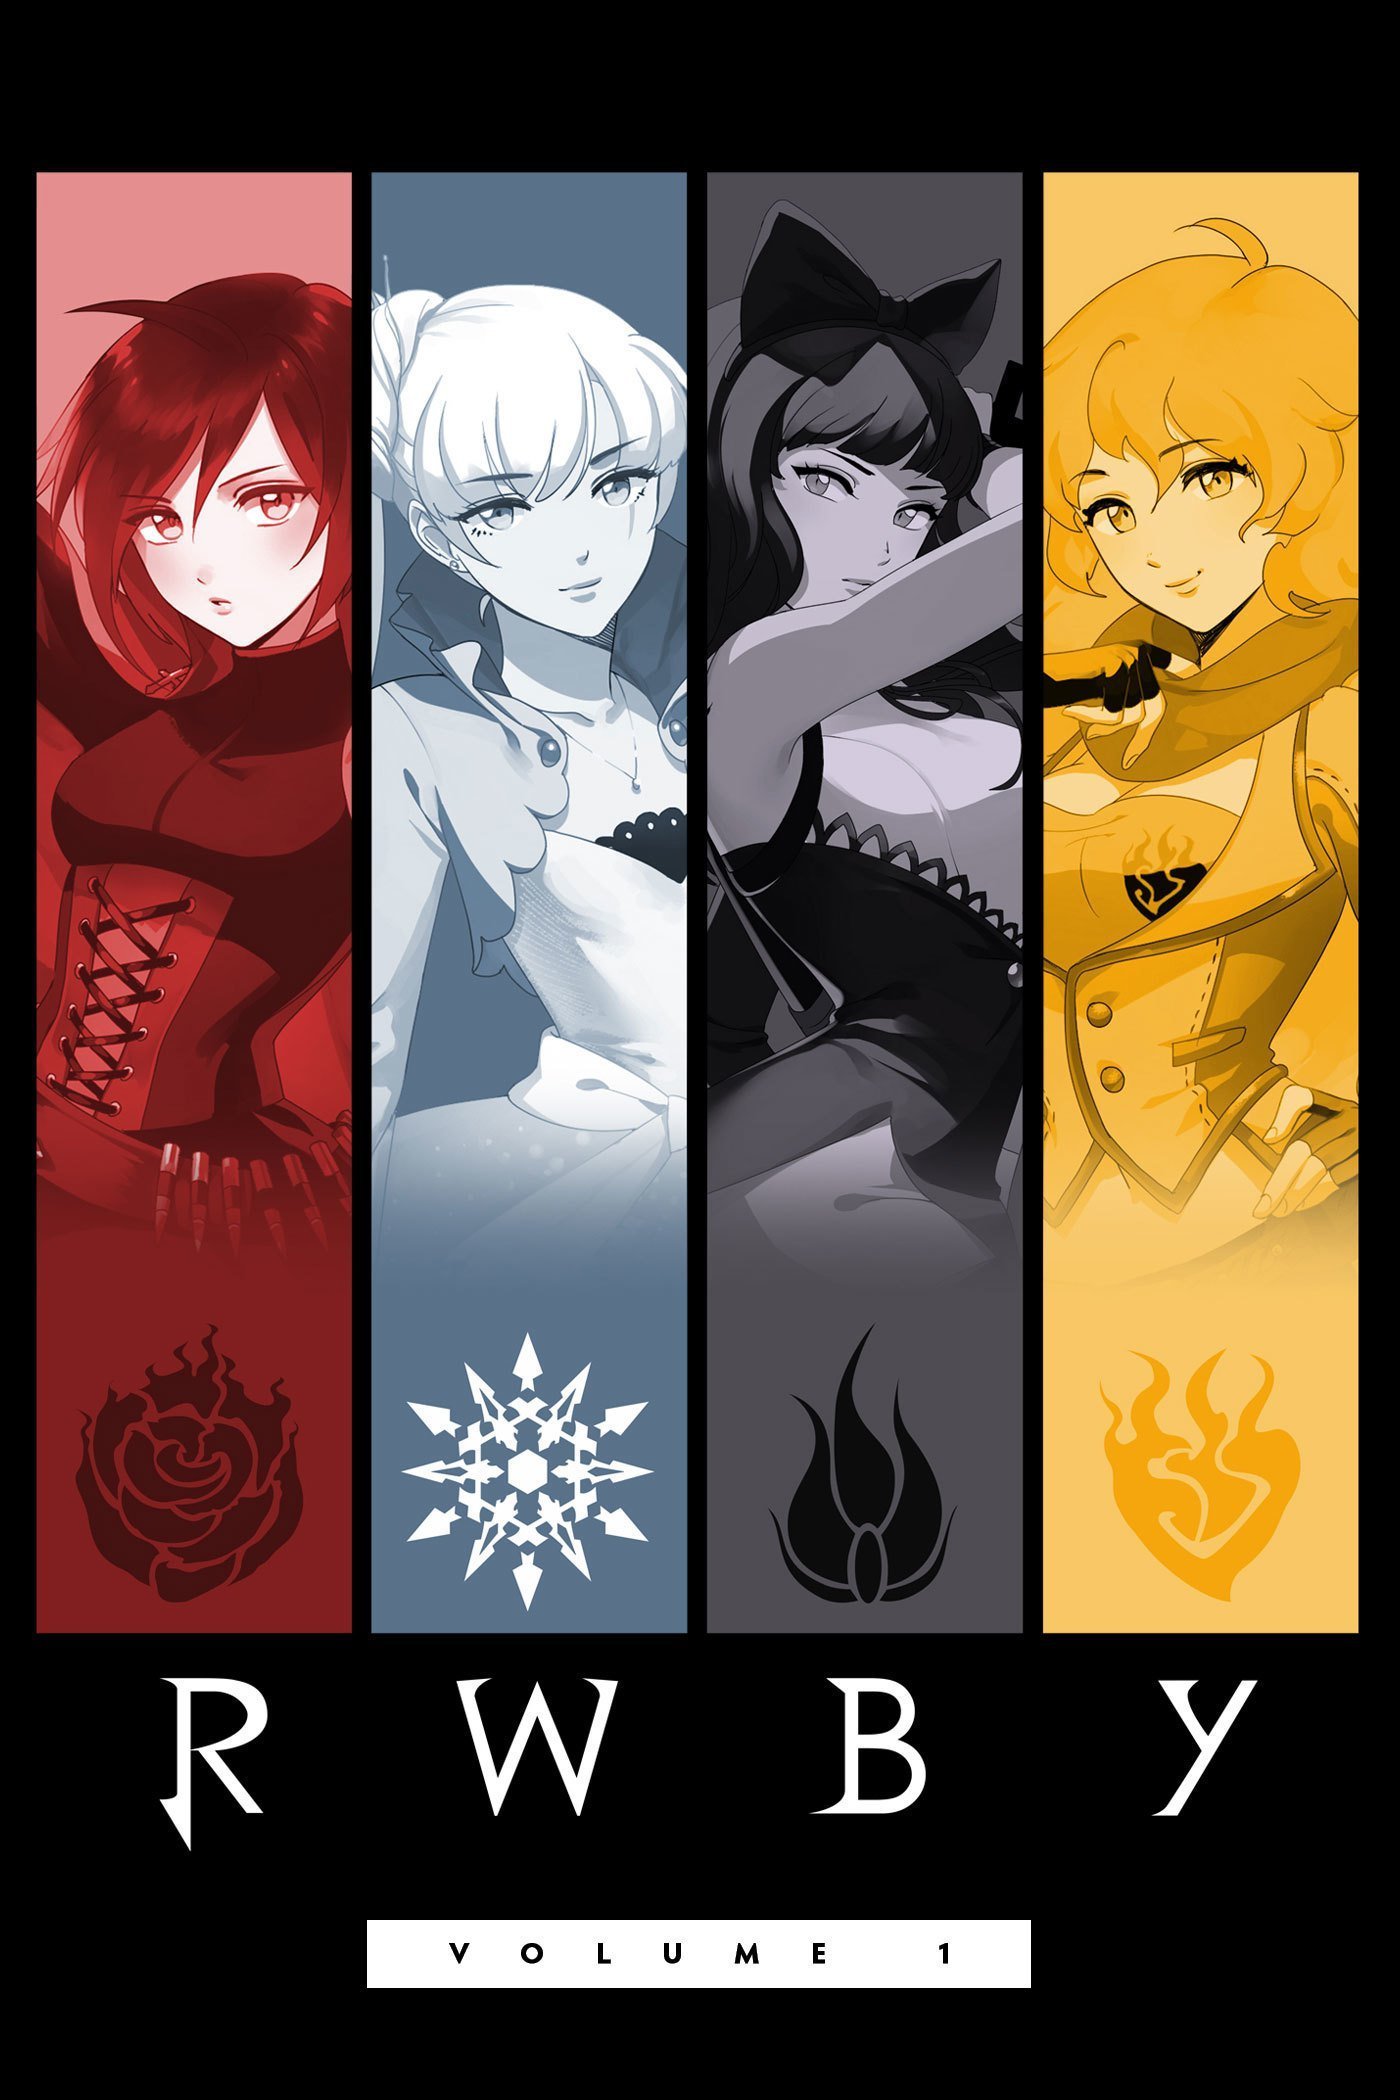 RWBY Volume 9 is Coming to Crunchyroll, Reveals Release Date